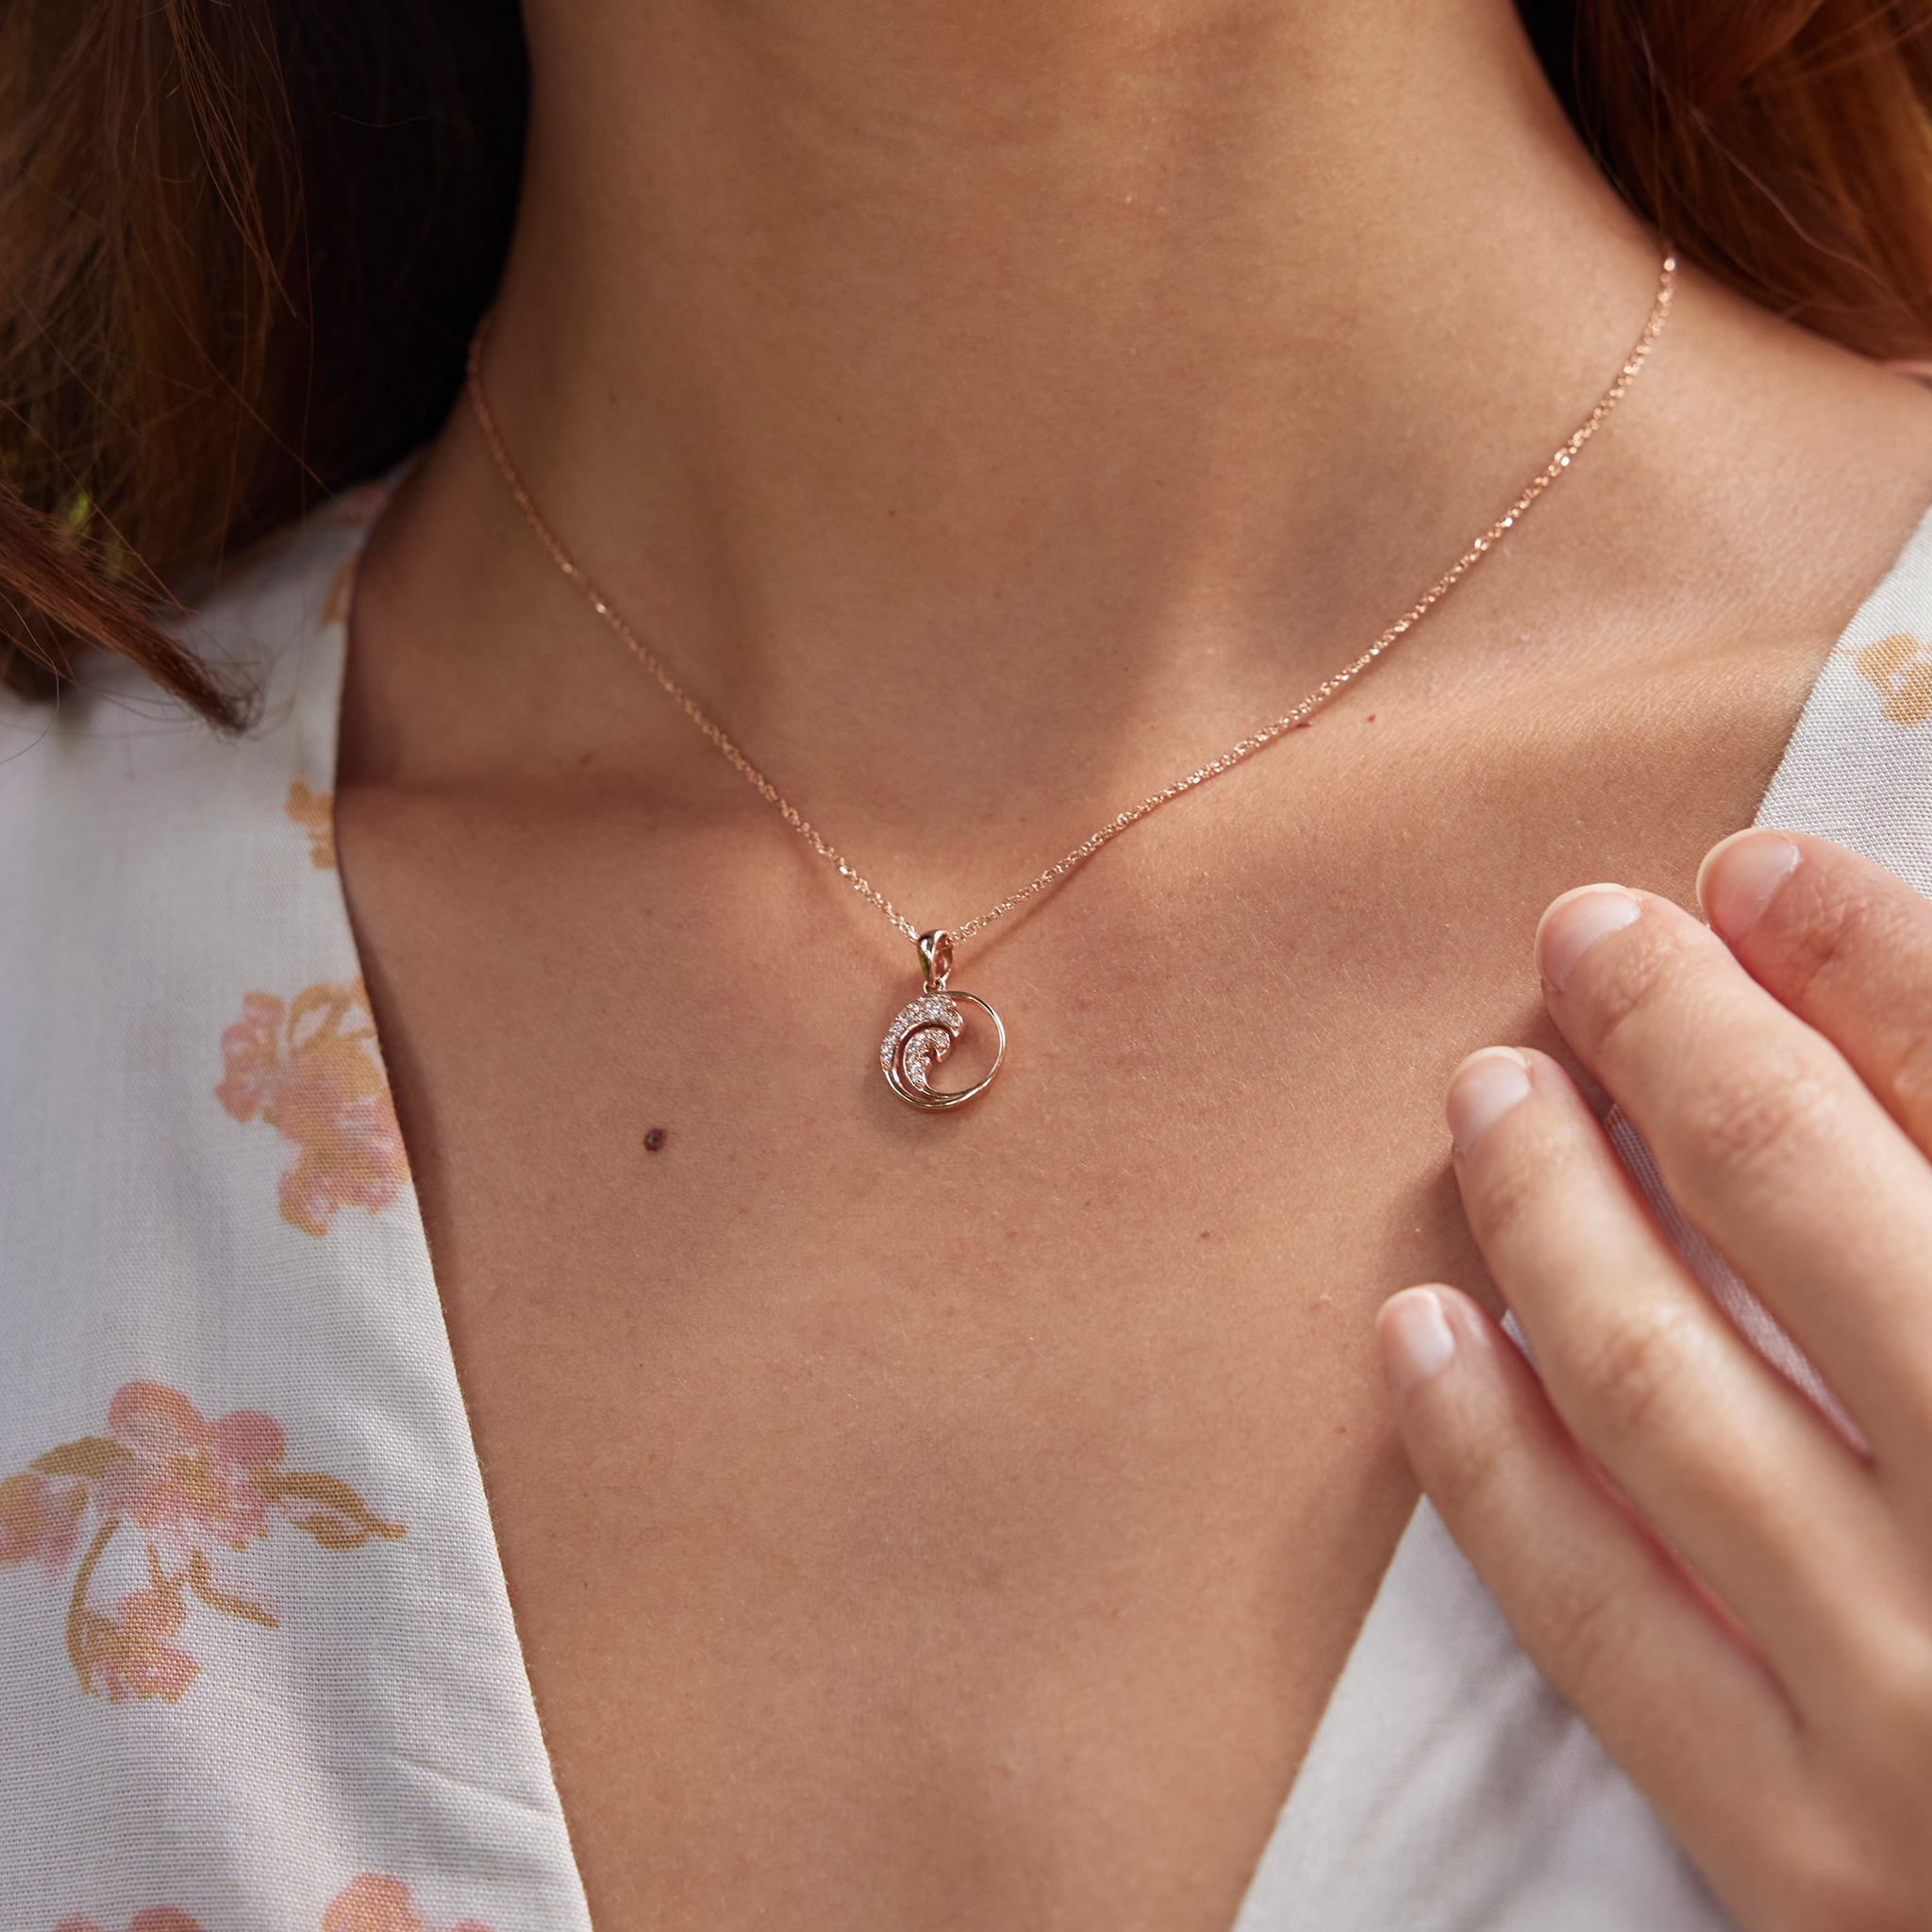 Nalu Pendant in Rose Gold with Diamonds - 12mm